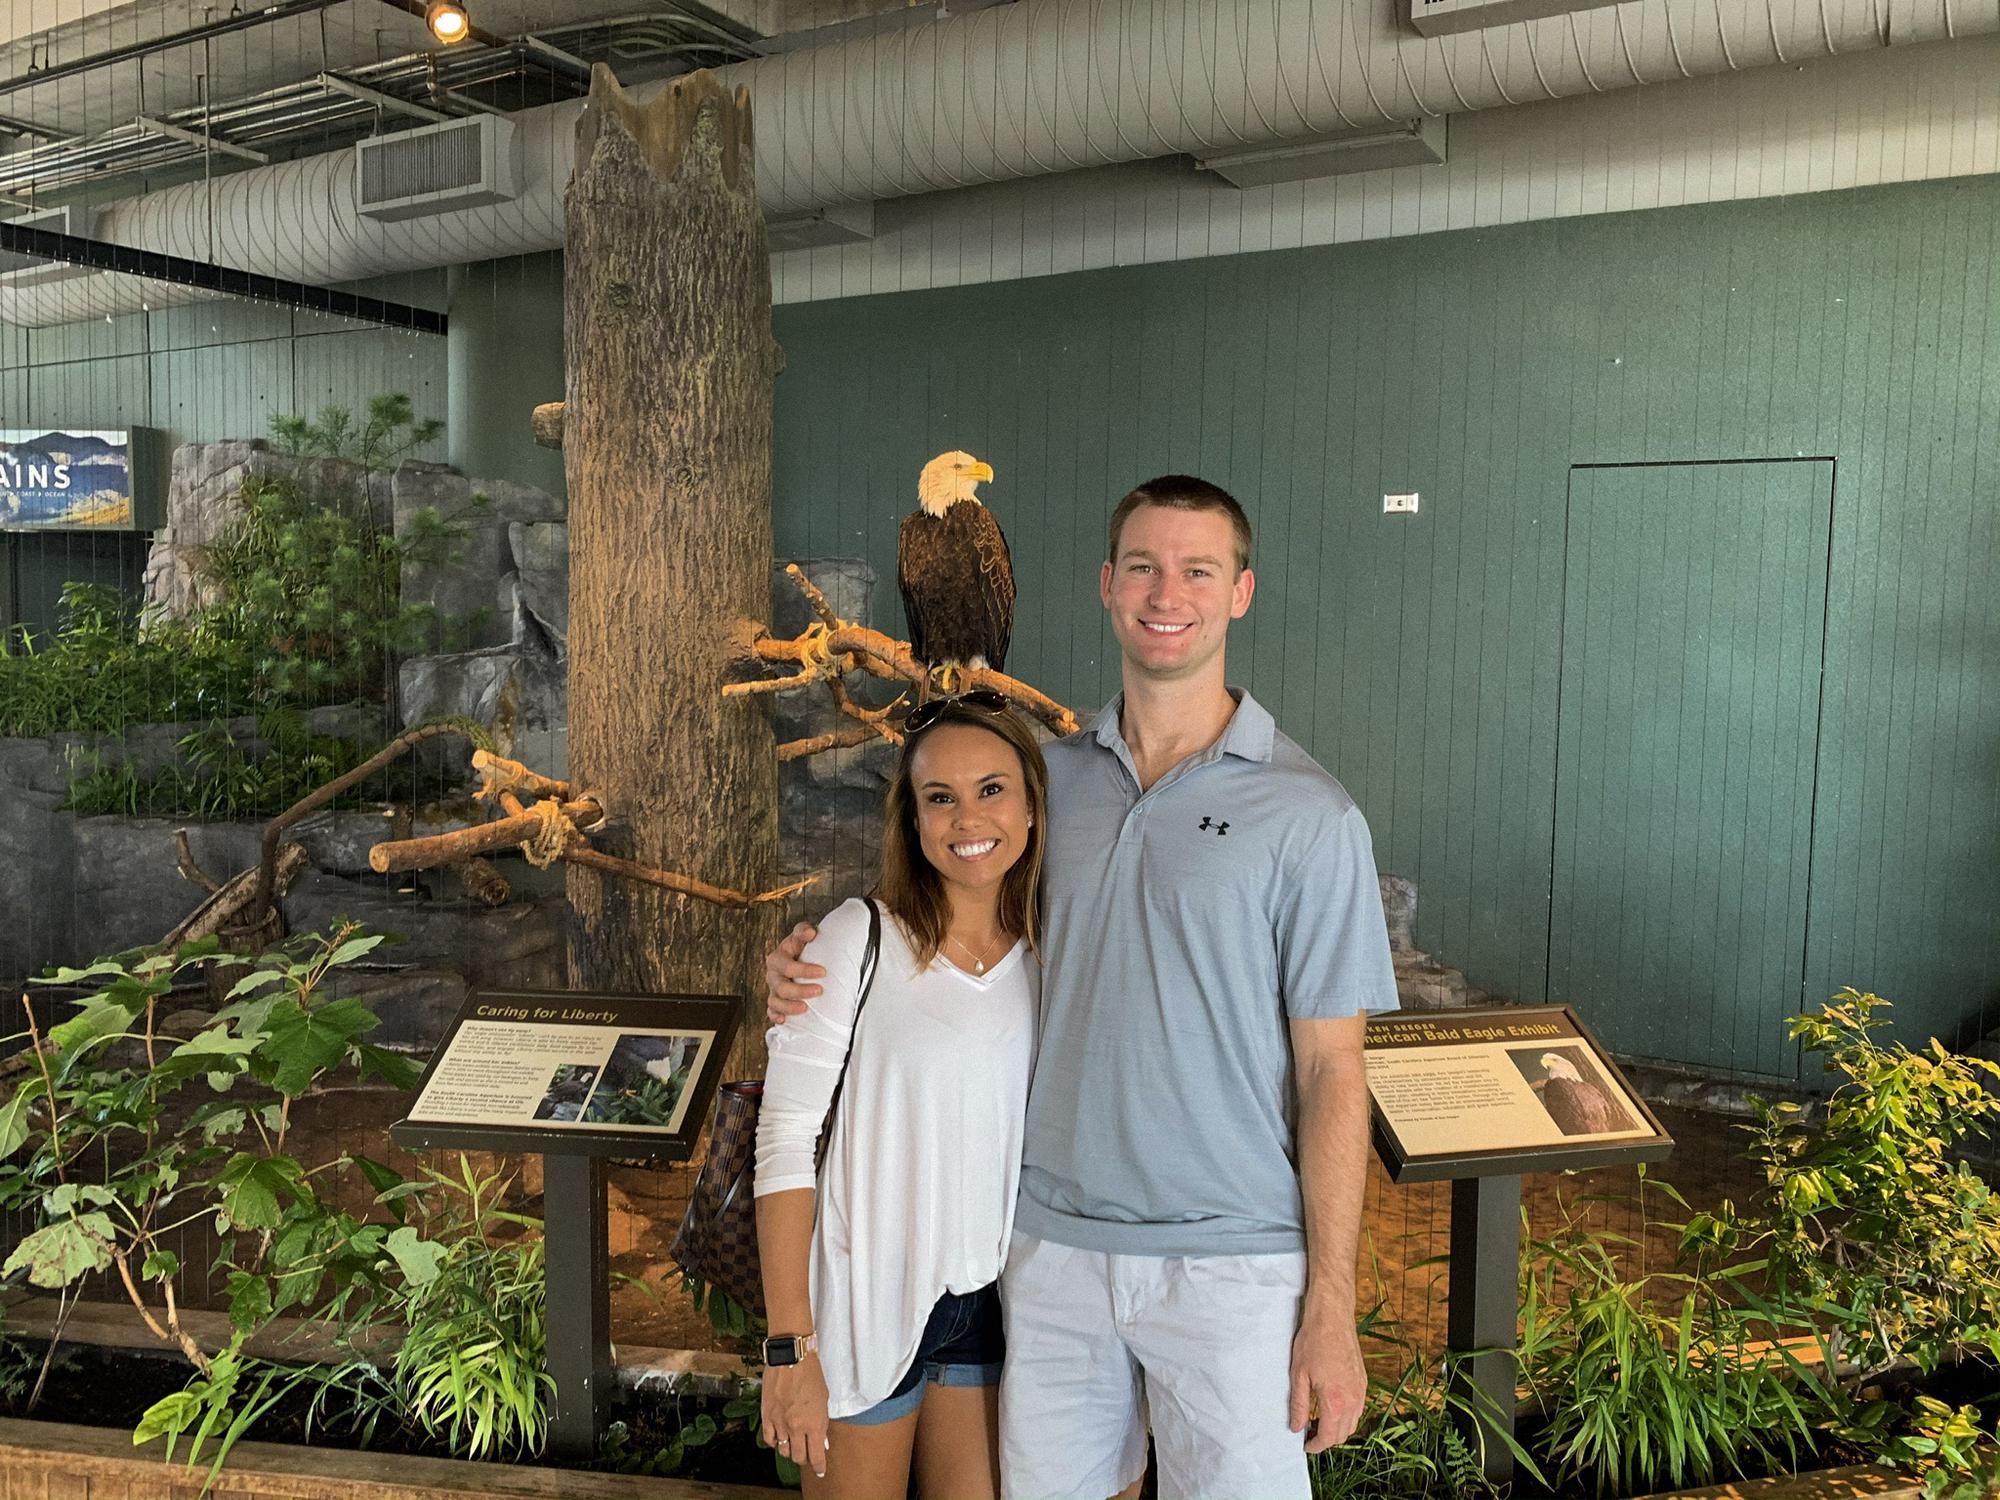 Hanging out with a bald eagle at the Charleston Aquarium, 2019.